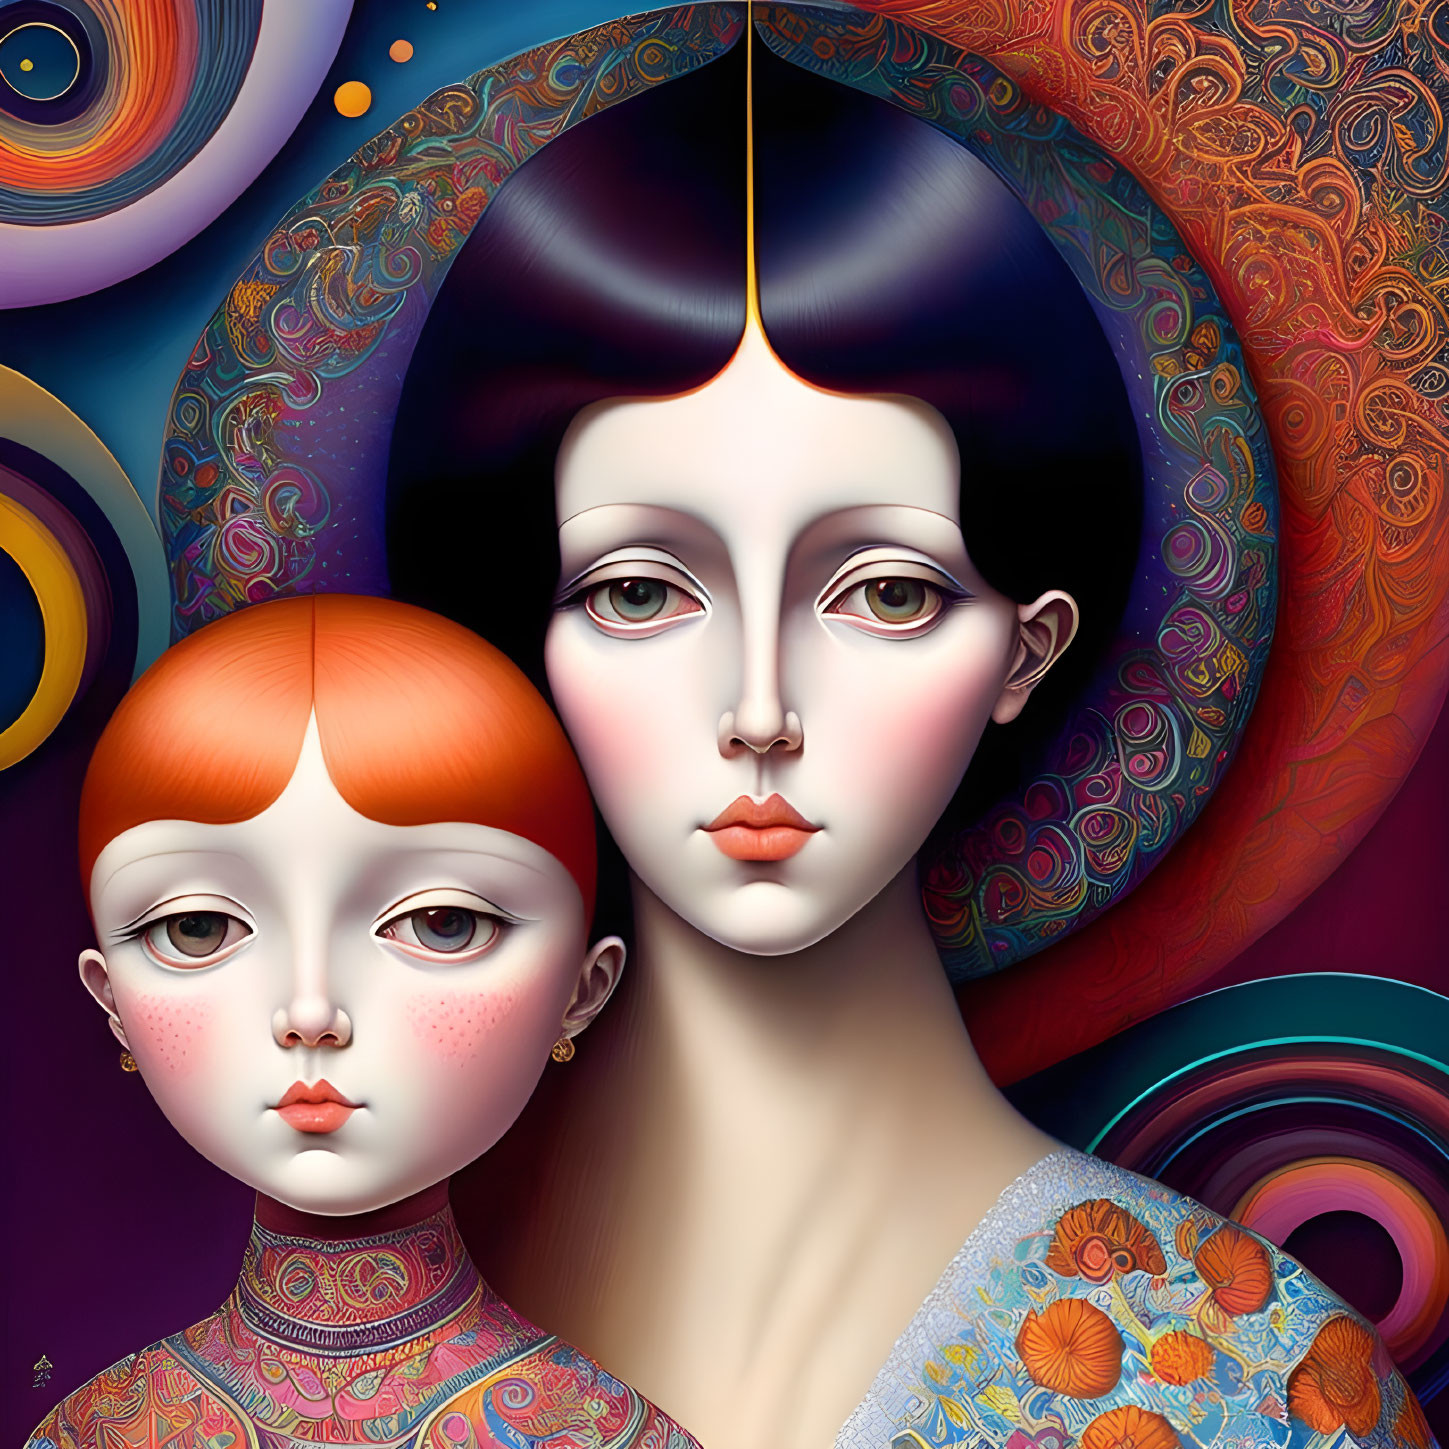 Colorful Stylized Portraits of Adult and Child with Intricate Patterns